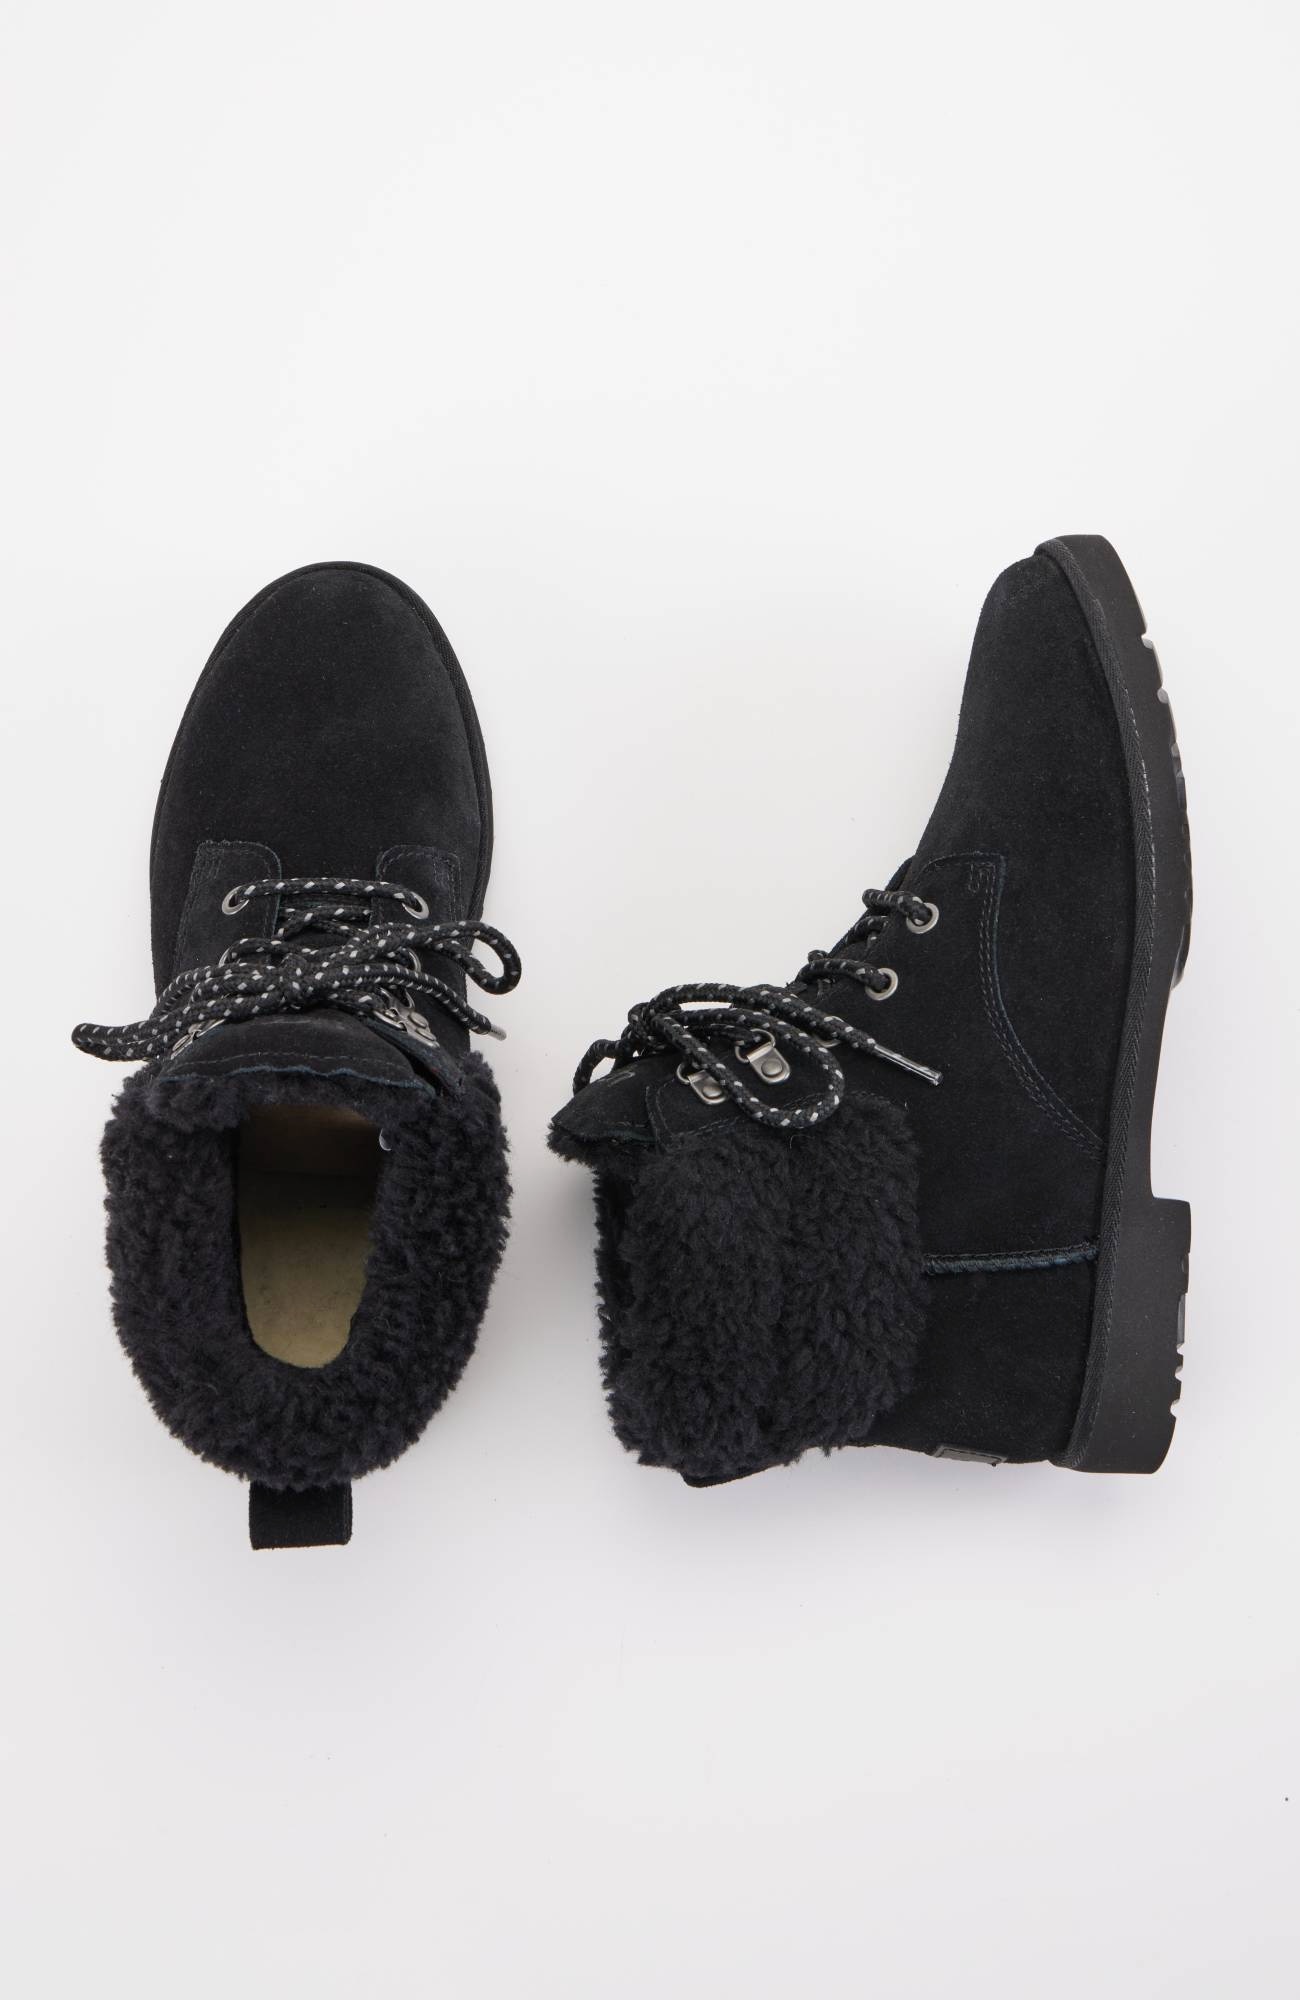 UGG® Romely Heritage Lace-Up Boots